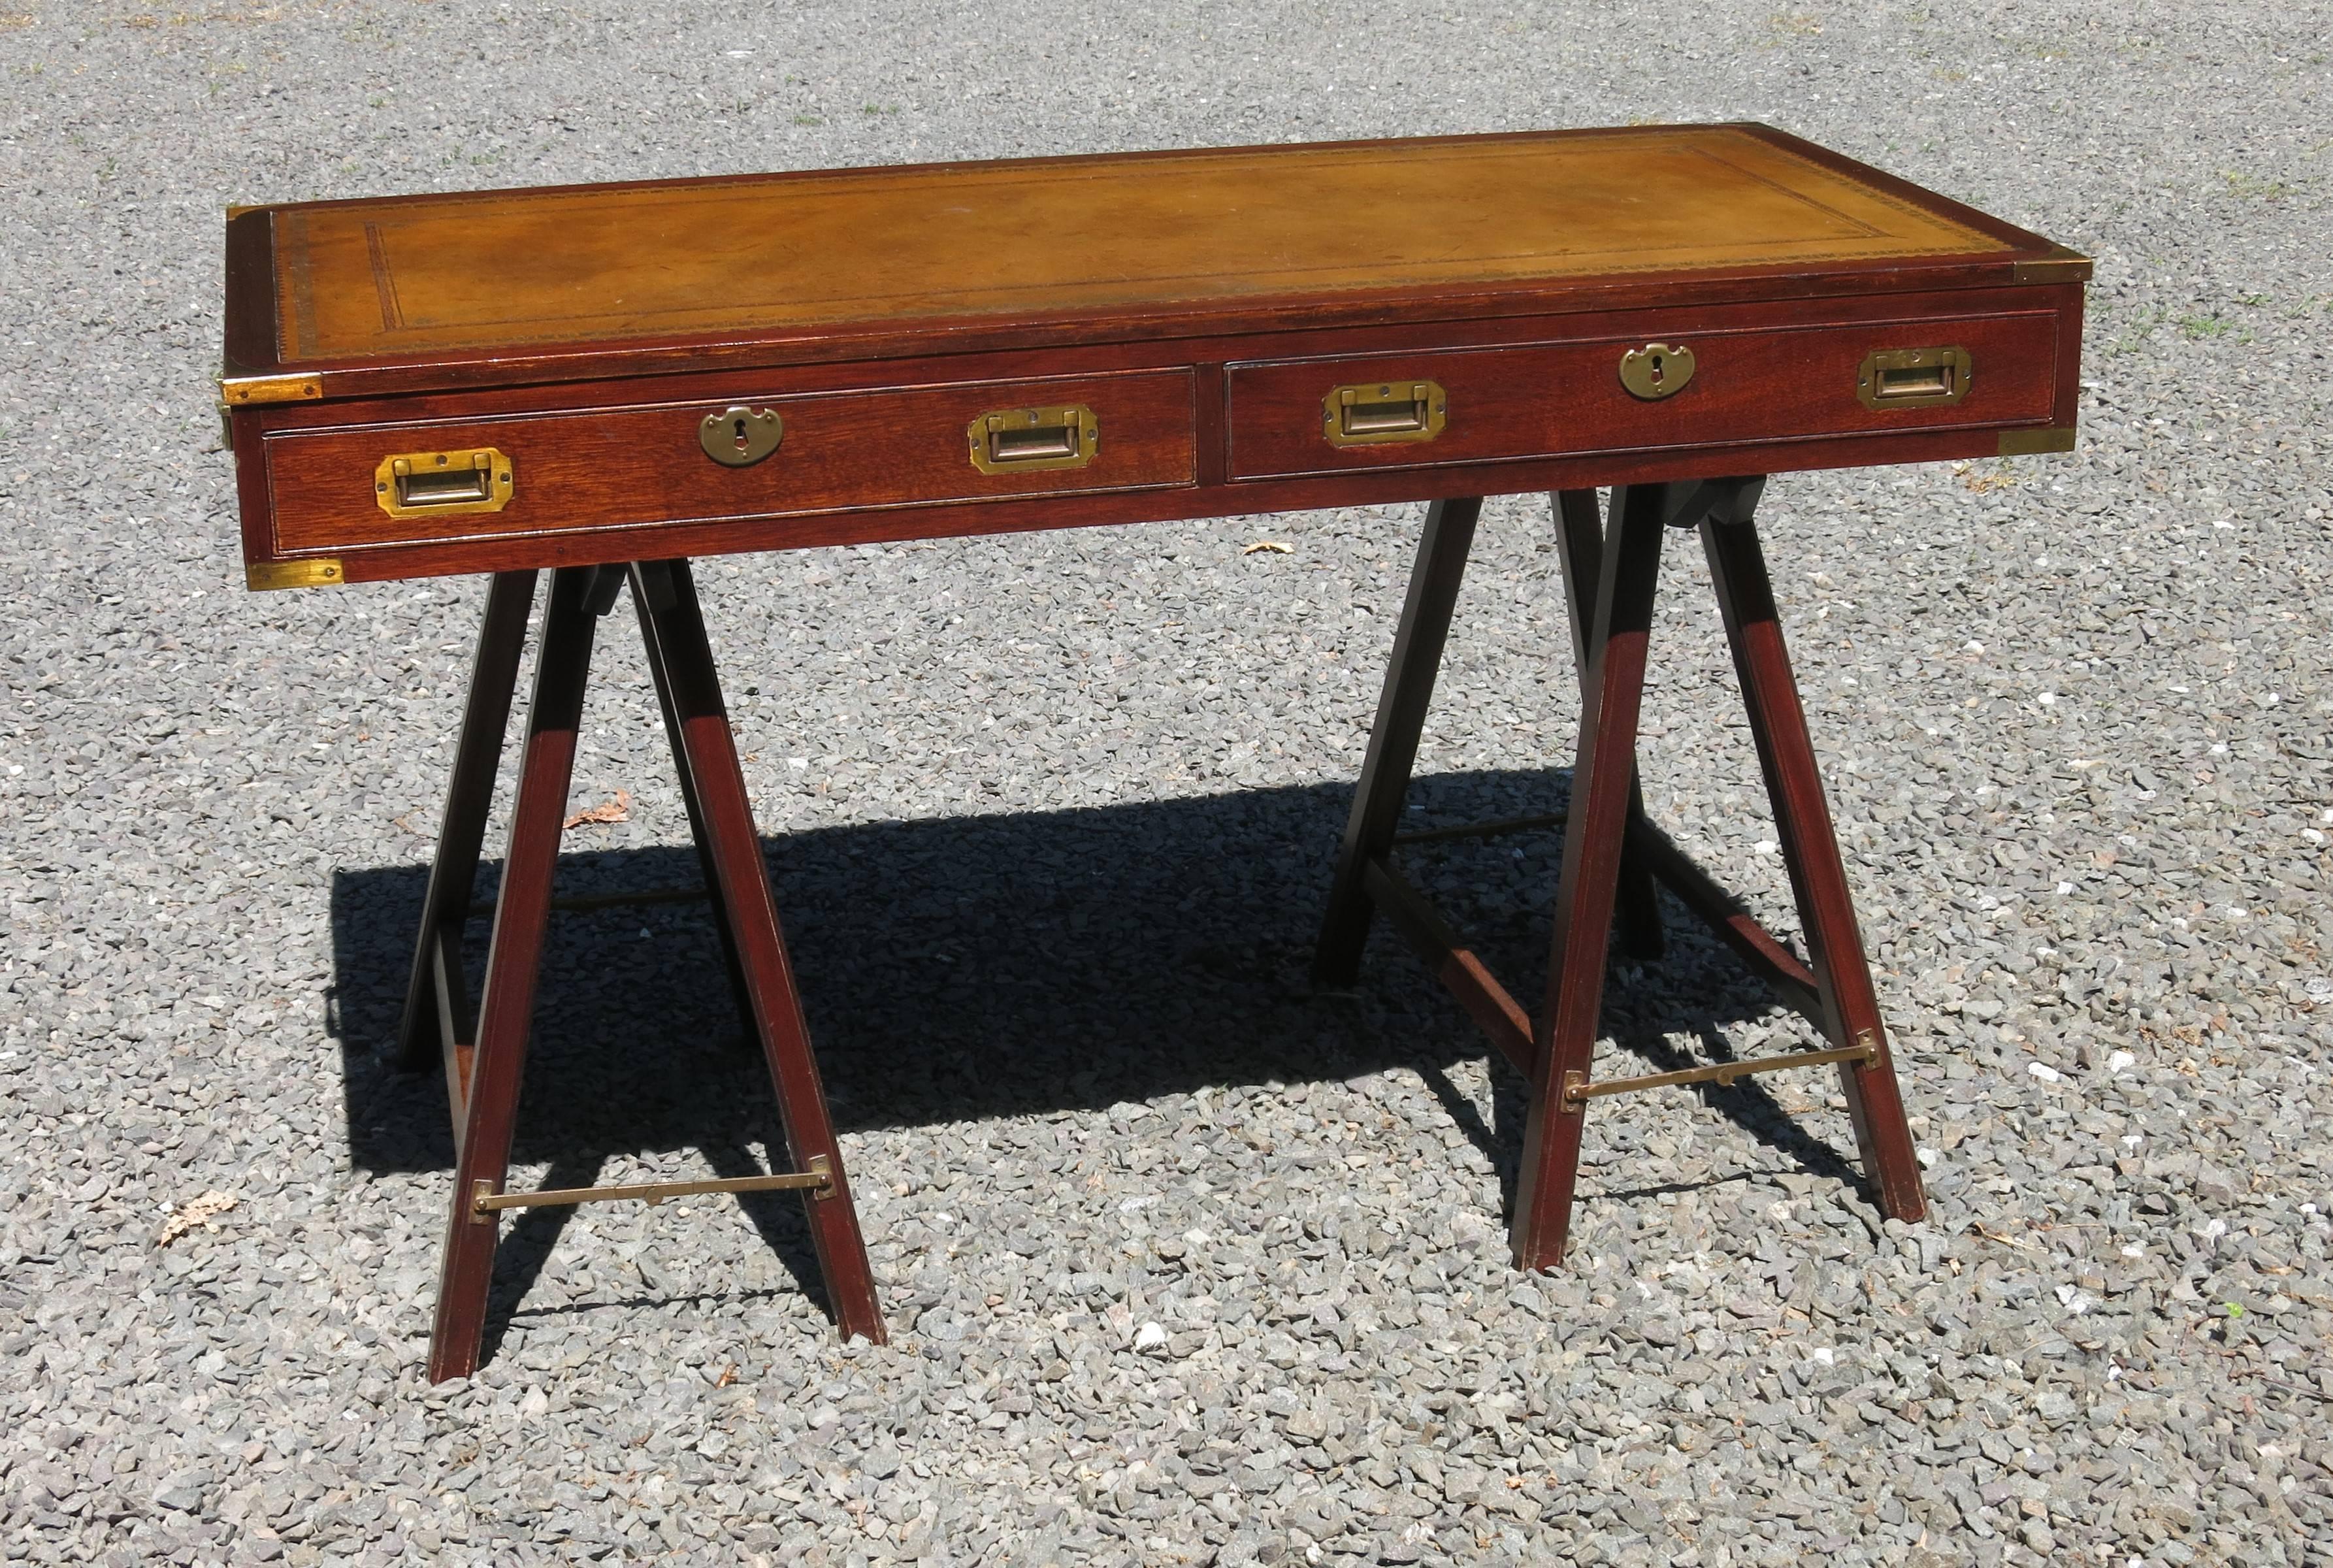 Vintage English campaign desk from the 1950s. It is 51